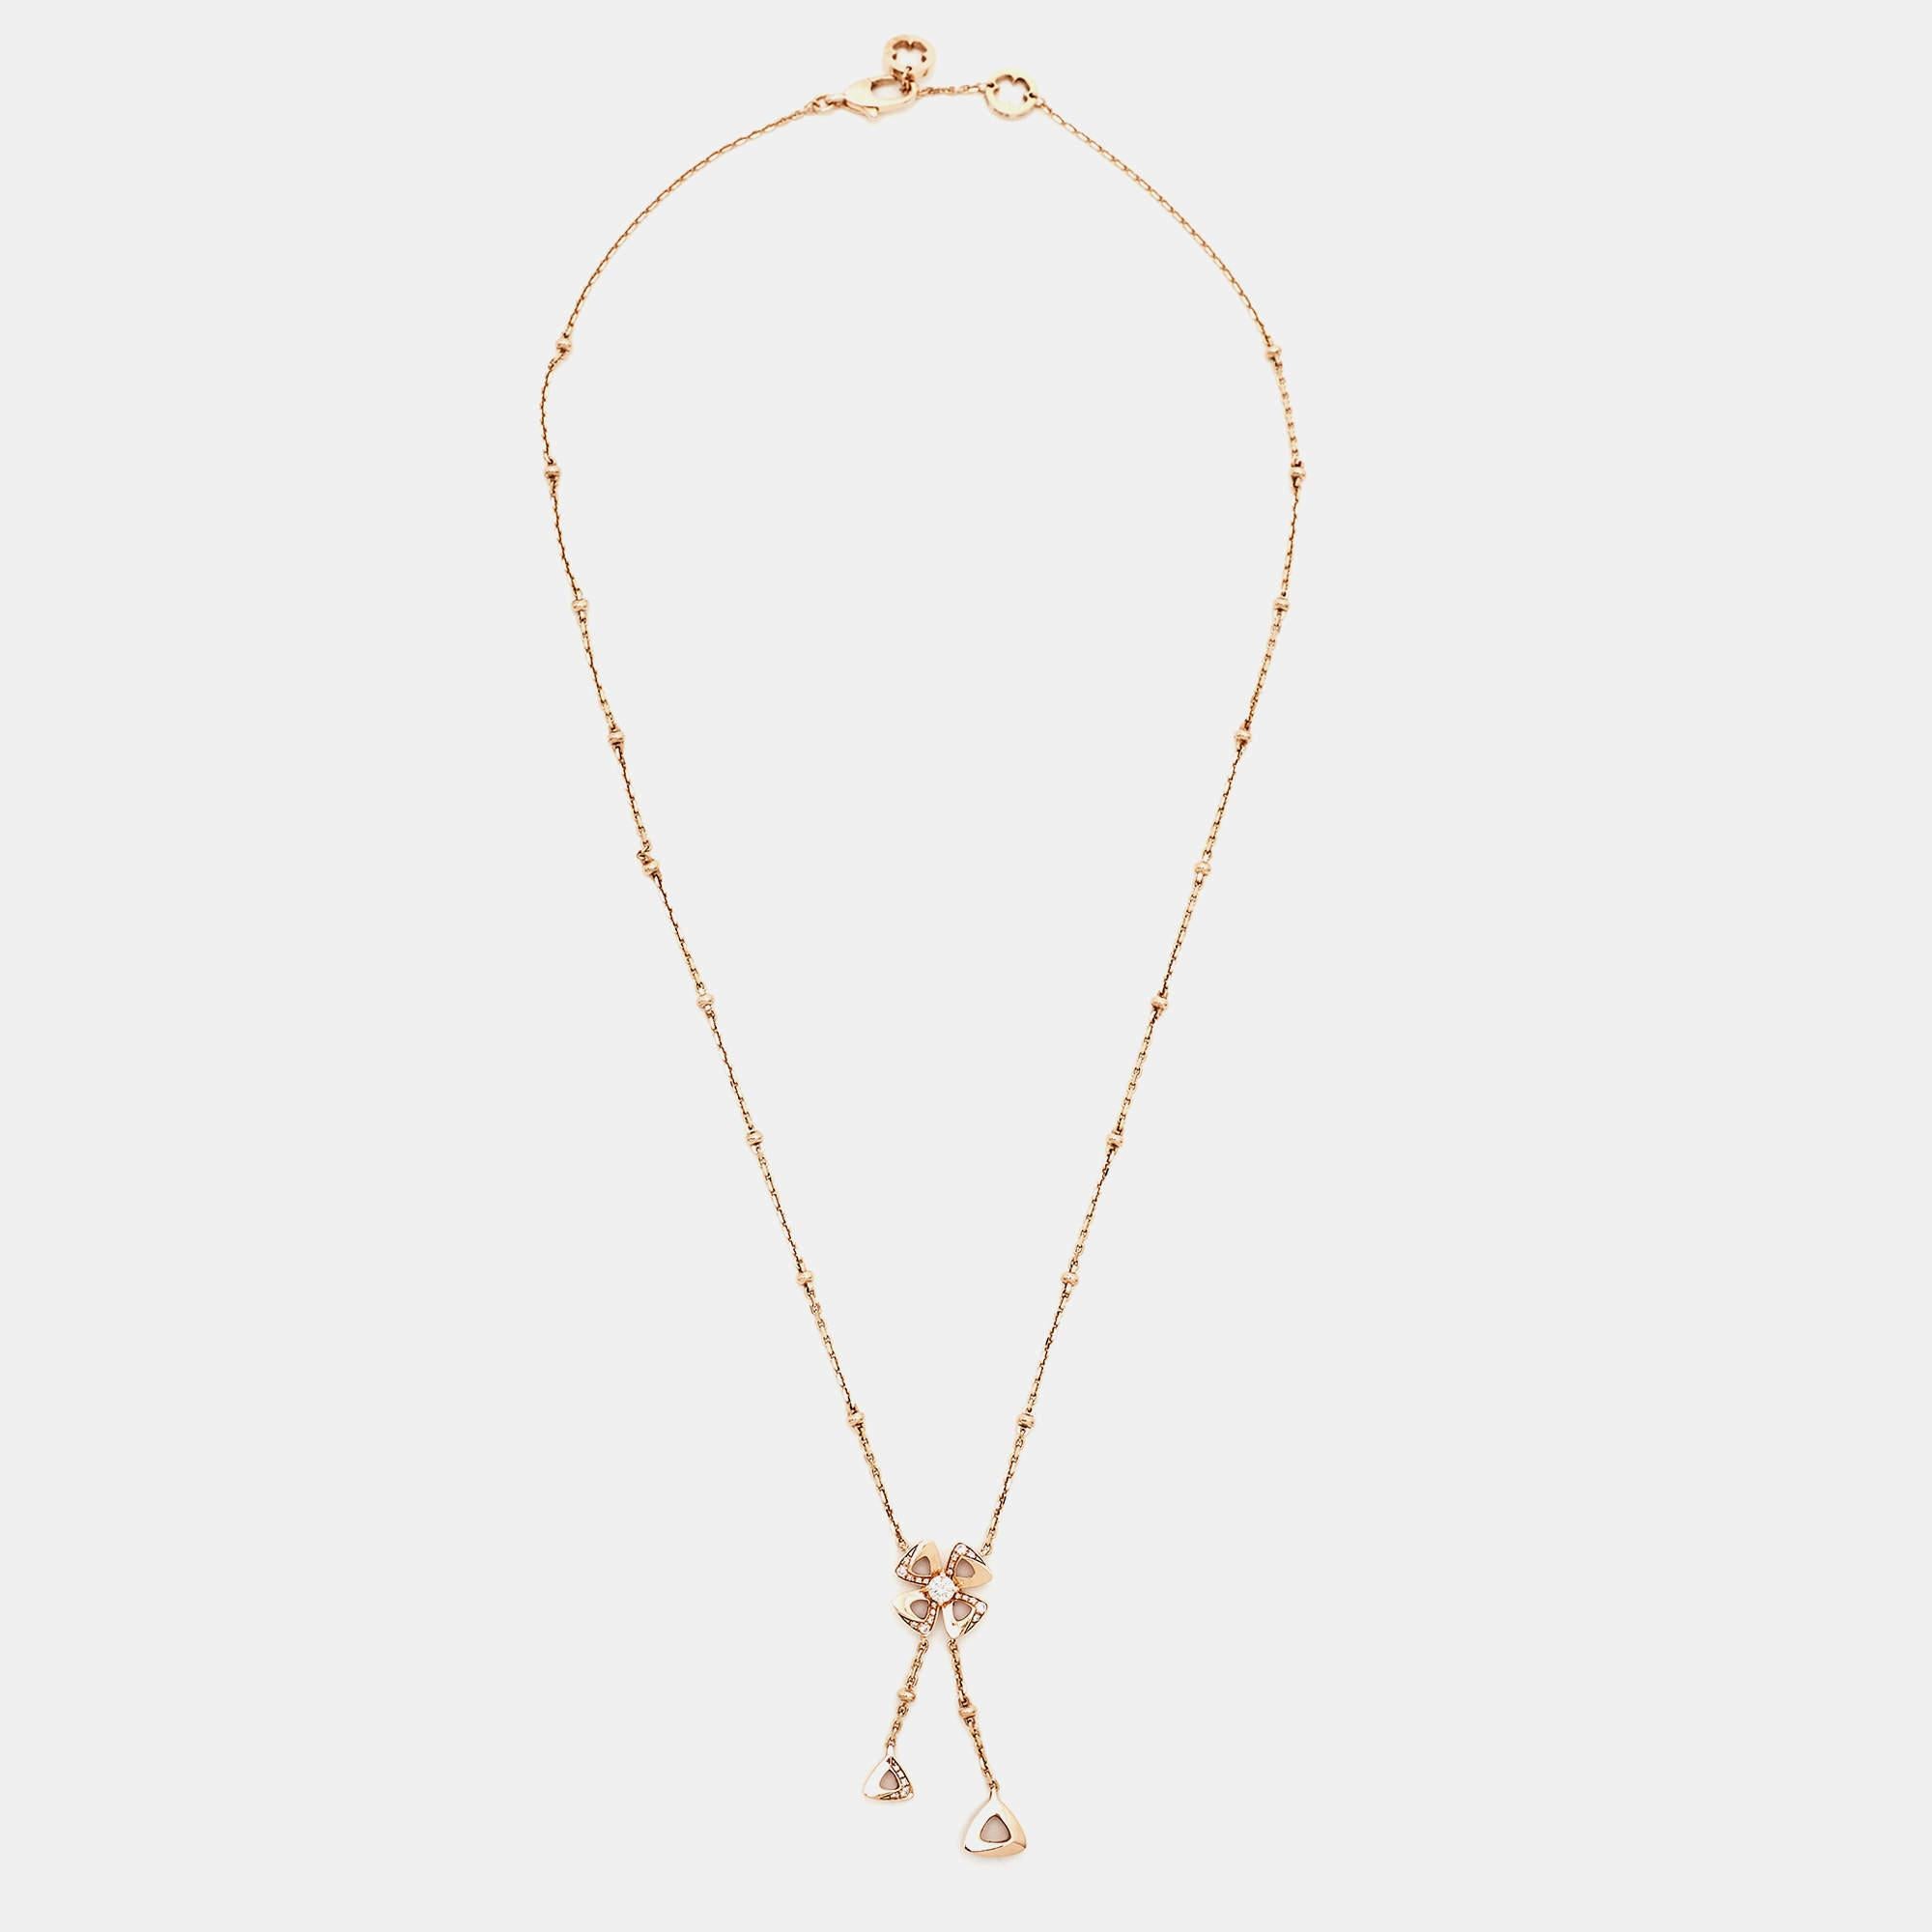 The Bvlgari Fiorever necklace is a captivating piece of jewelry that exudes elegance. Crafted in exquisite 18K rose gold, it features a delicate chain adorned with a dazzling flower-shaped pendant. The pendant is embellished with brilliant diamonds,